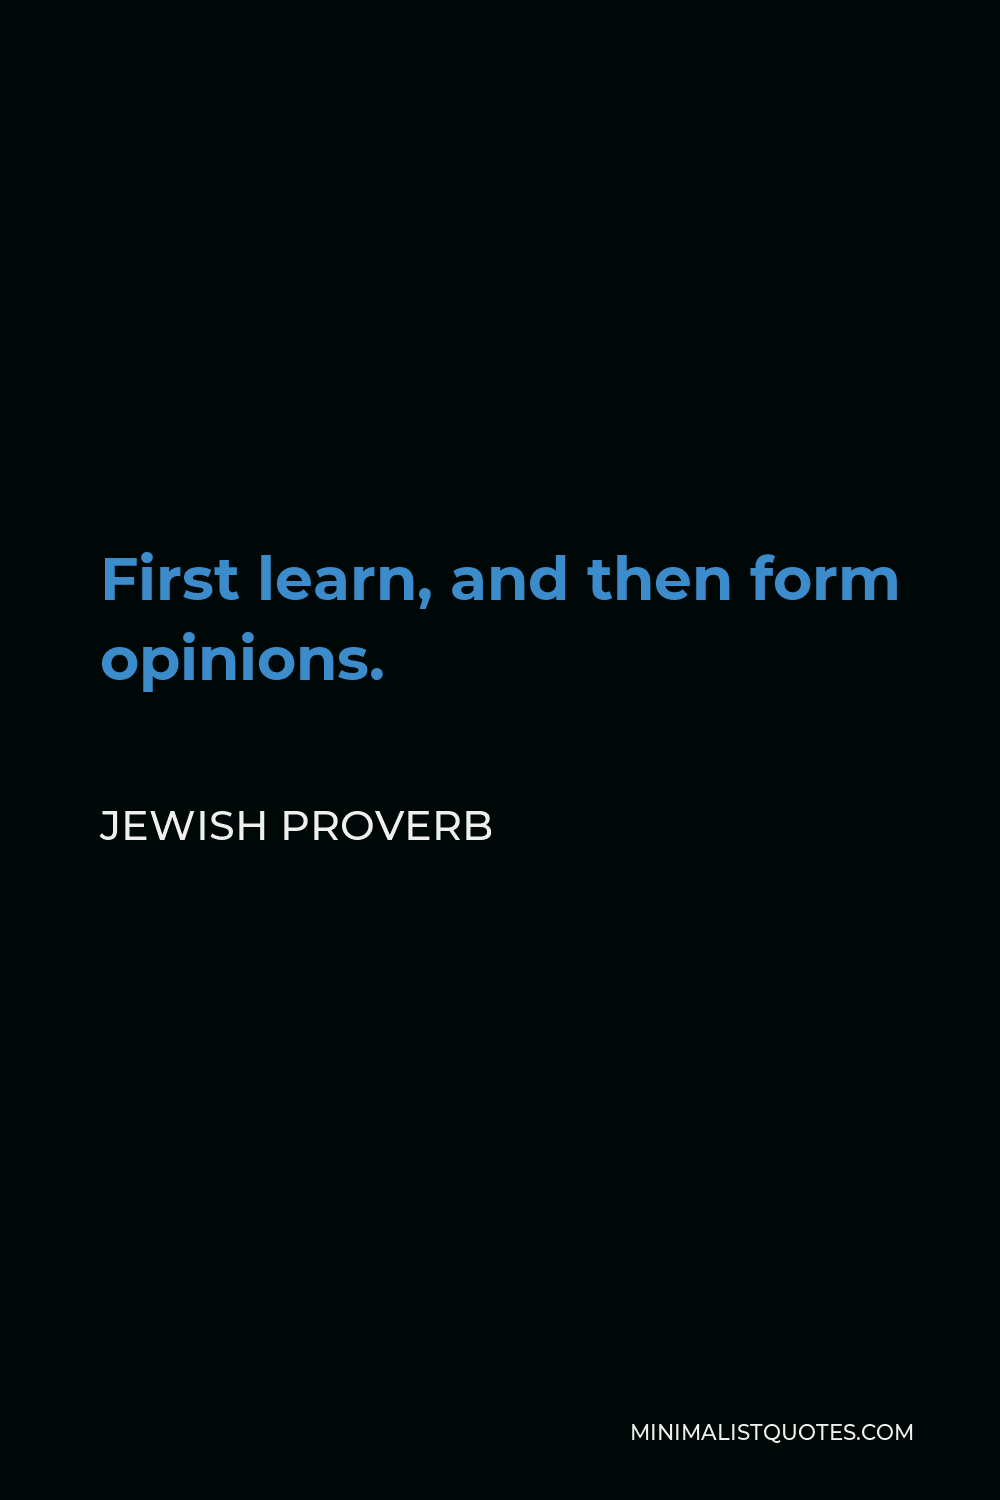 Jewish Proverb Quote - First learn, and then form opinions.